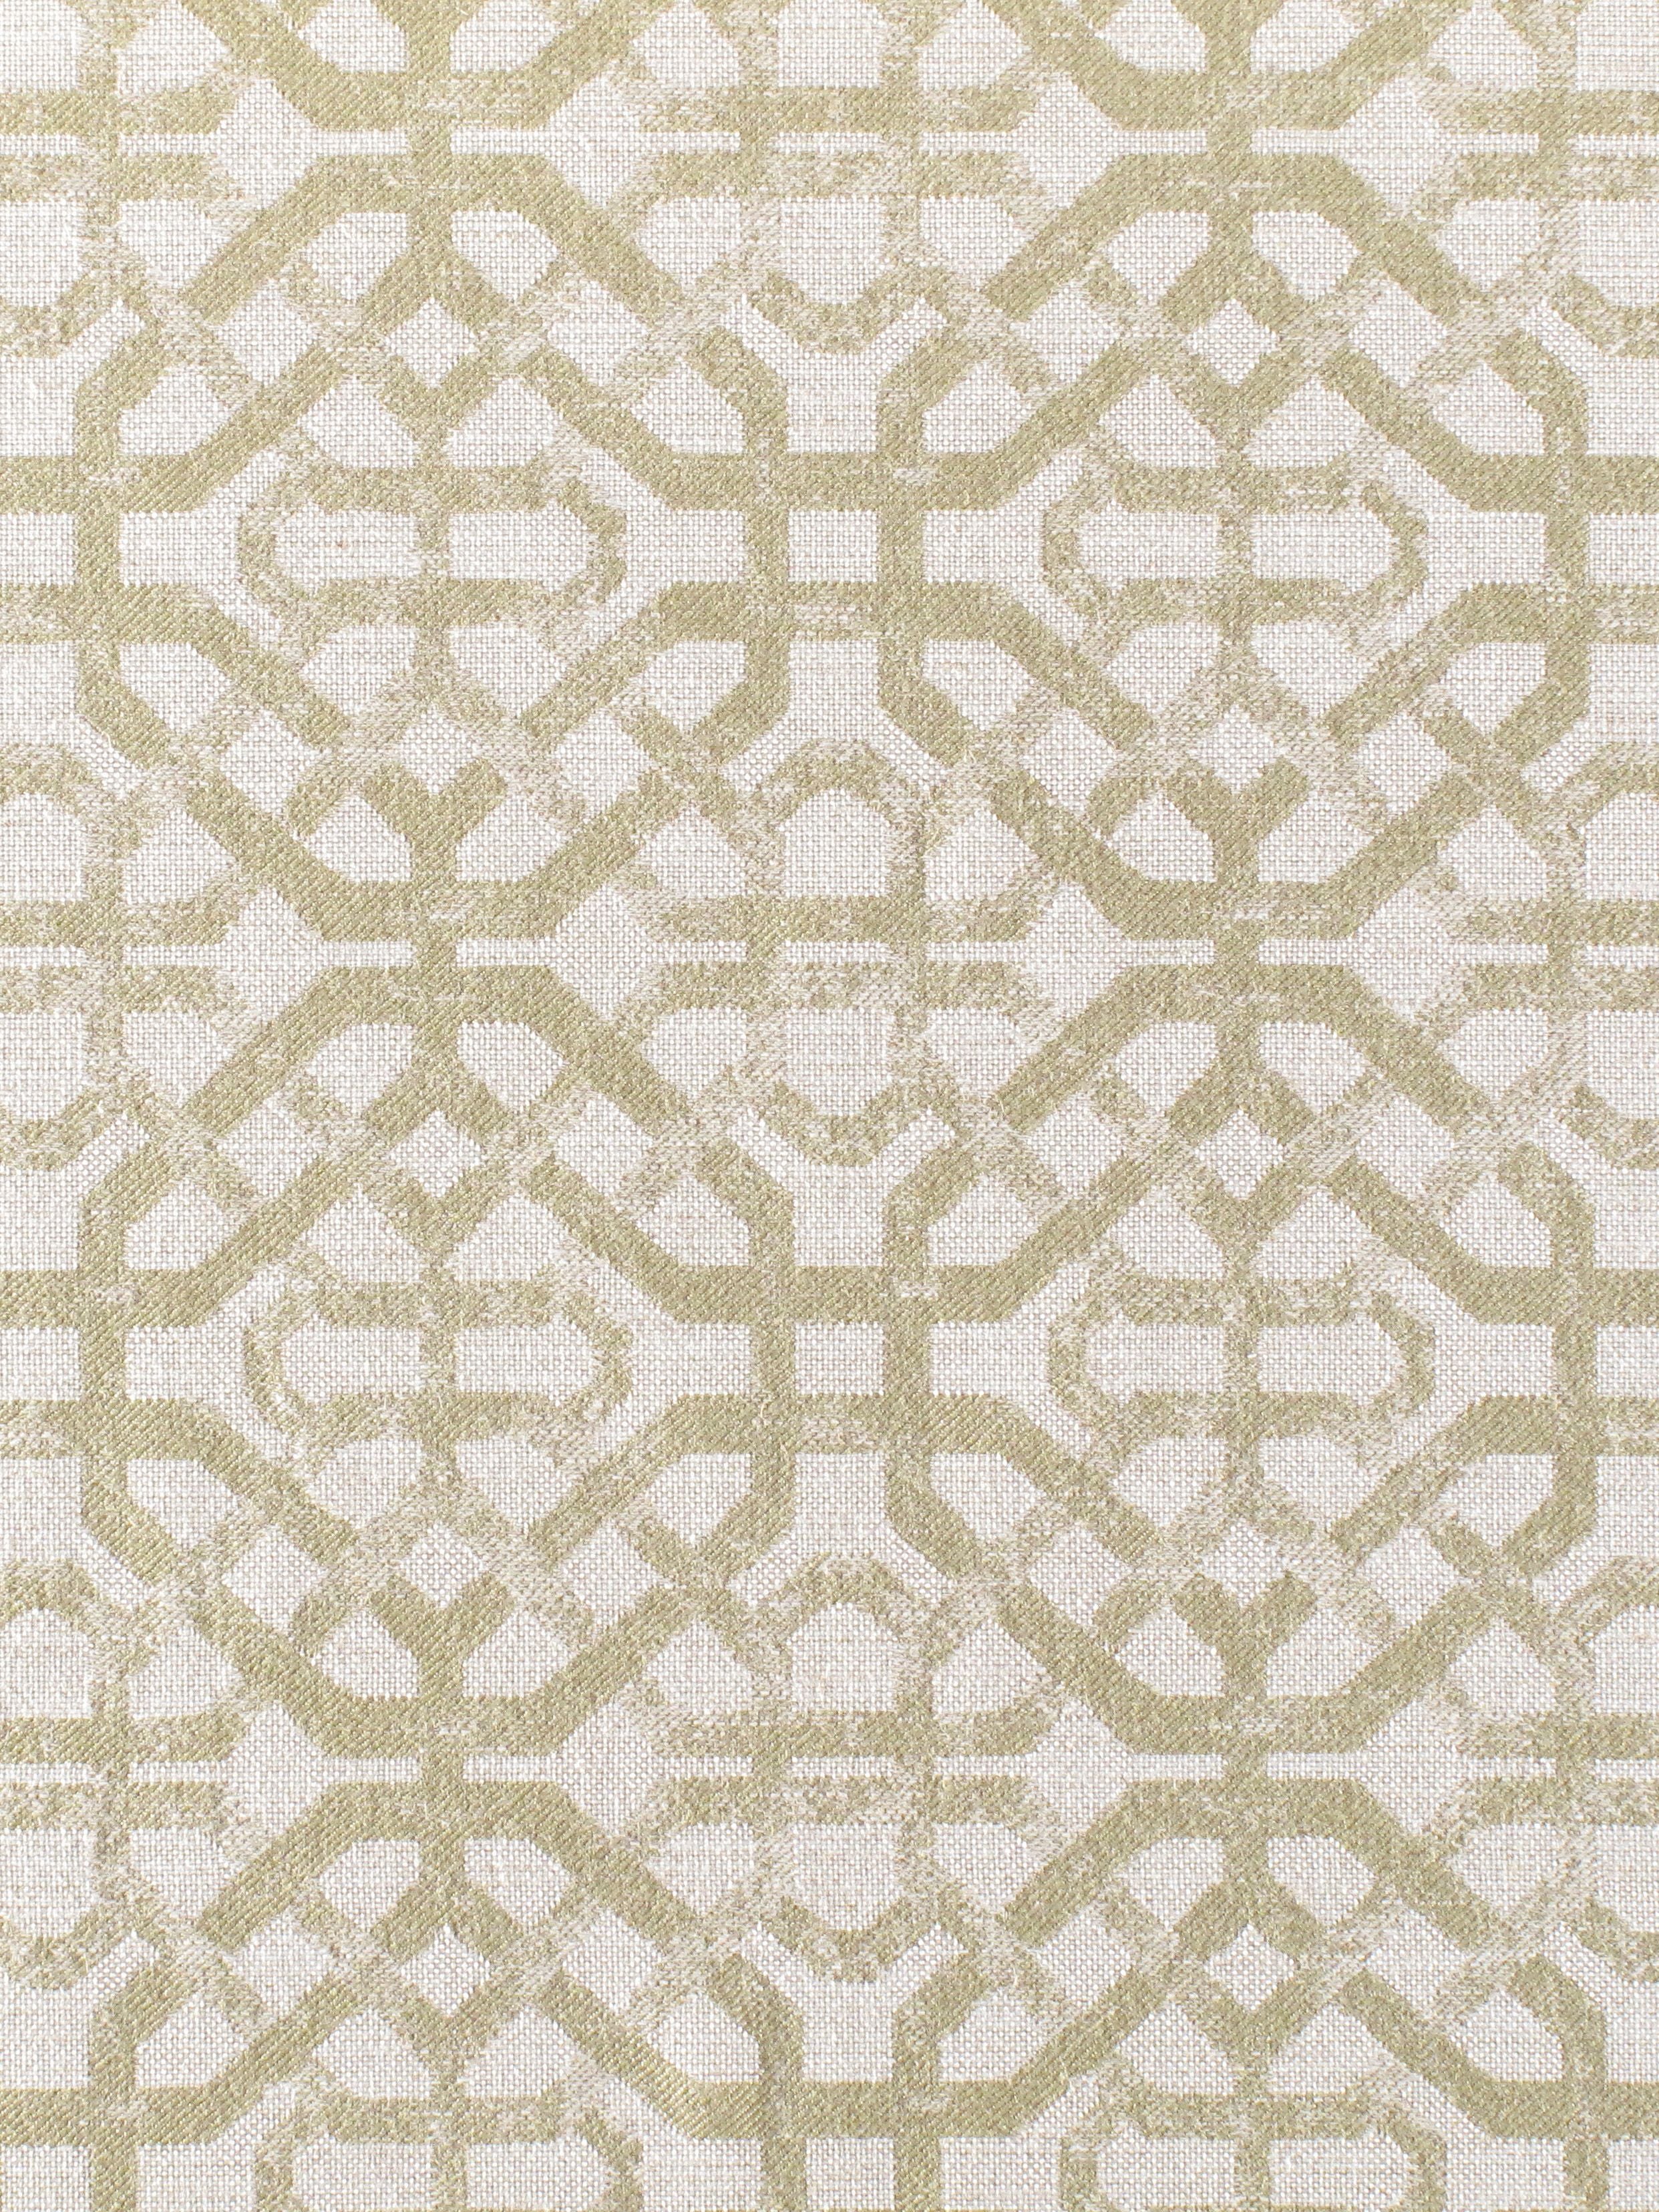 Porta Fregio fabric in leaf color - pattern number N3 00033133 - by Scalamandre in the Old World Weavers collection